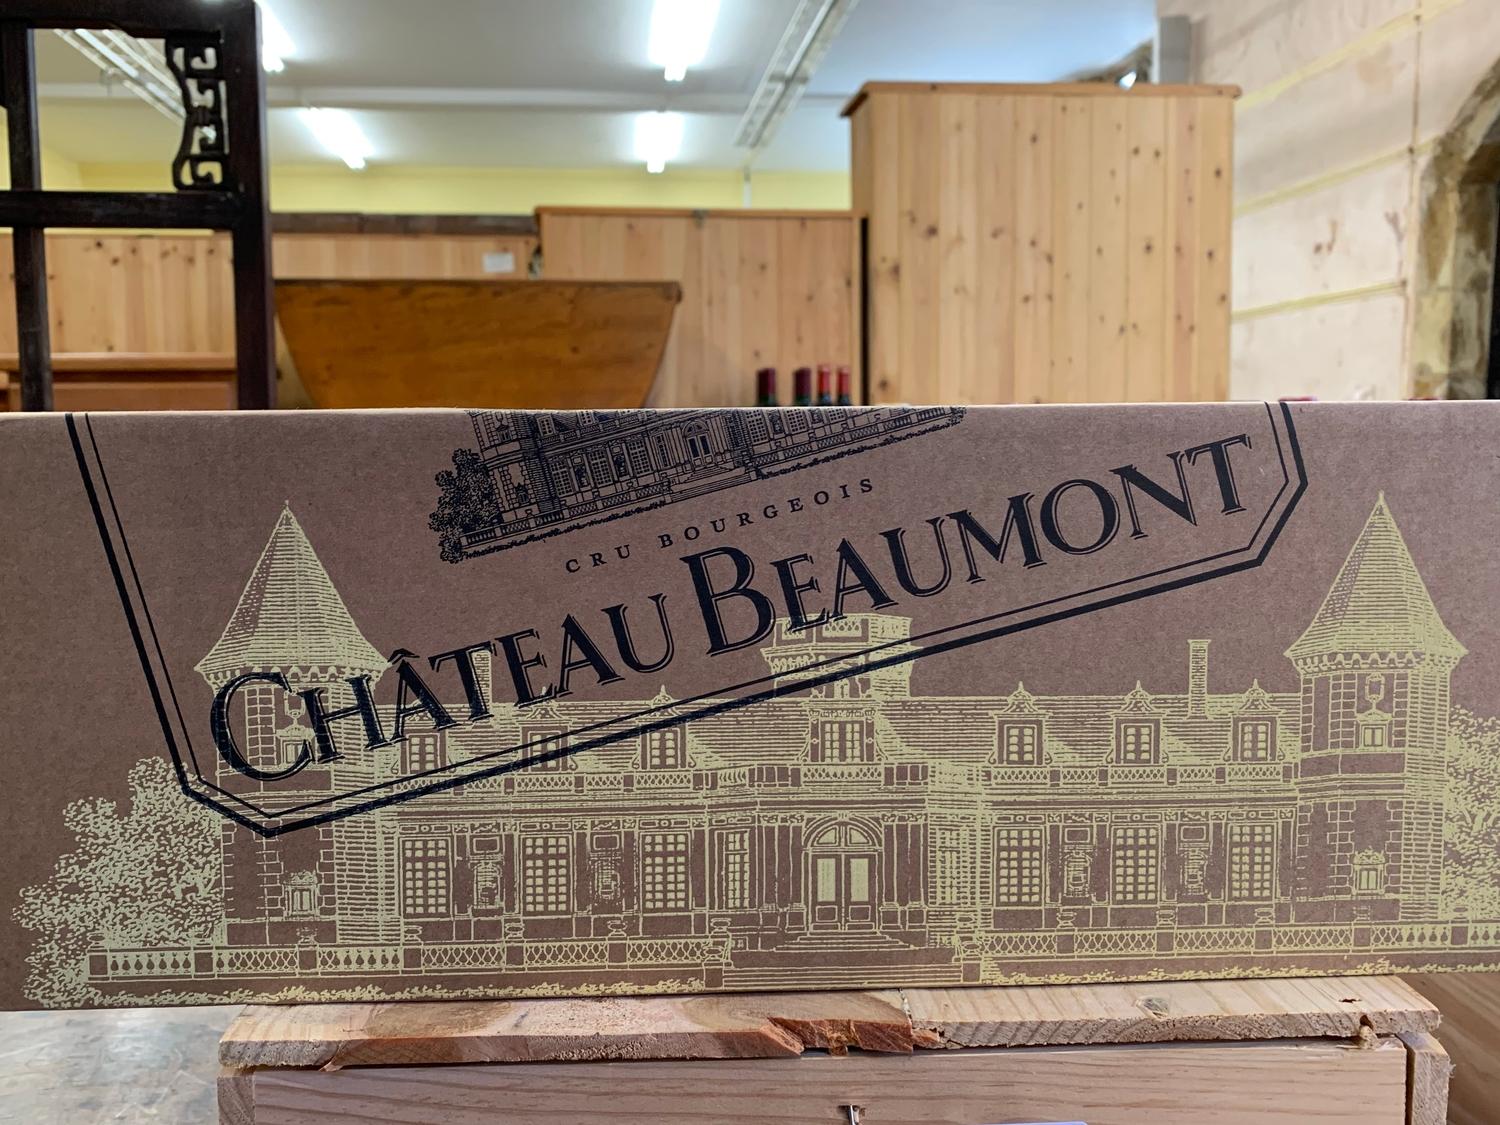 Twelve bottles of Chateau Beaumont Cru Bourgeoise Haut-Medoc, 2010, in cardboard box From a Ferndown